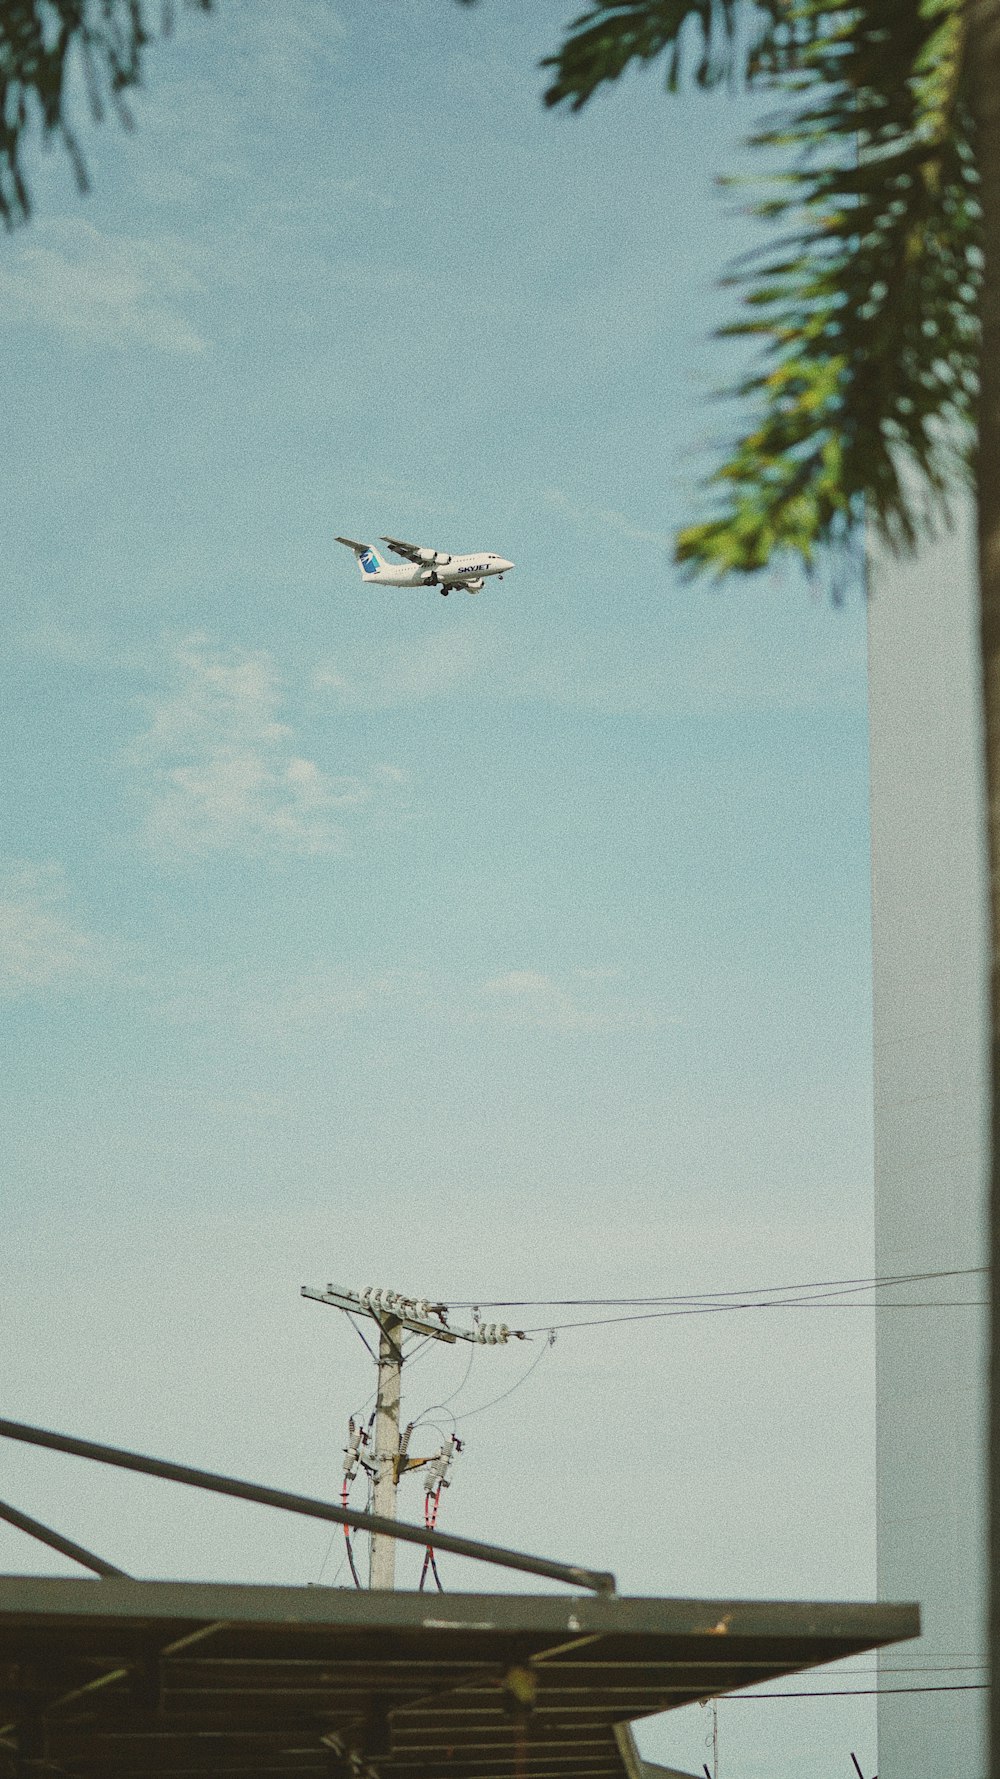 white commercial airplane